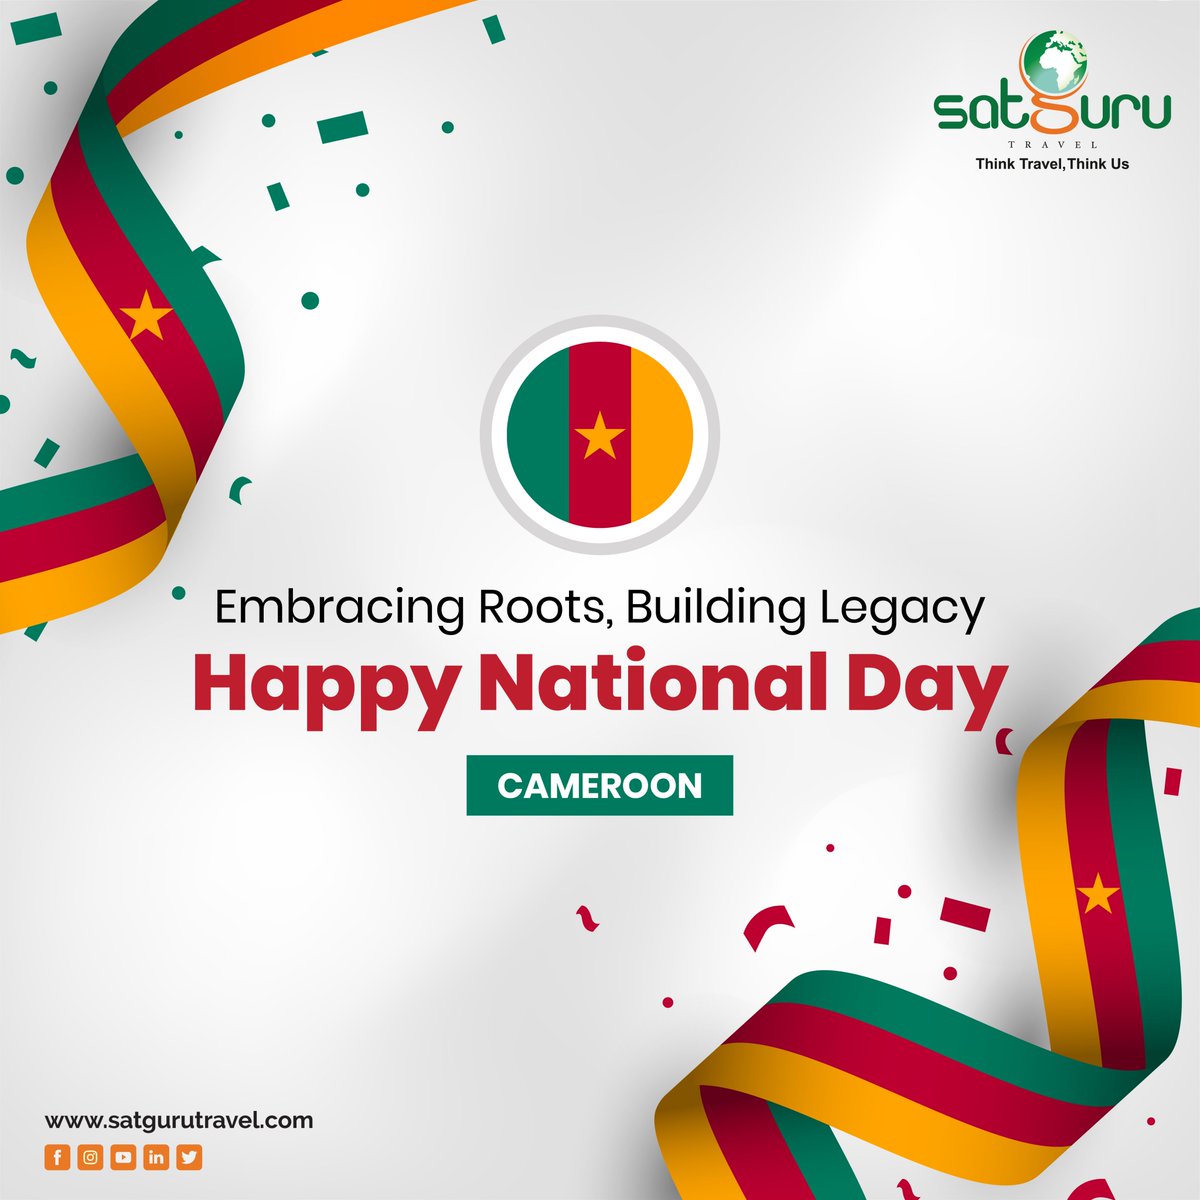 Happy National Day, Cameroon, from Satguru! May the colours of our flag ignite our spirits, foster national pride, and propel everyone towards a future of peace, progress, and prosperity 
.
.
.
.
#cameroon #happynationalday #travel #tourism #travelagent #satgurutravel